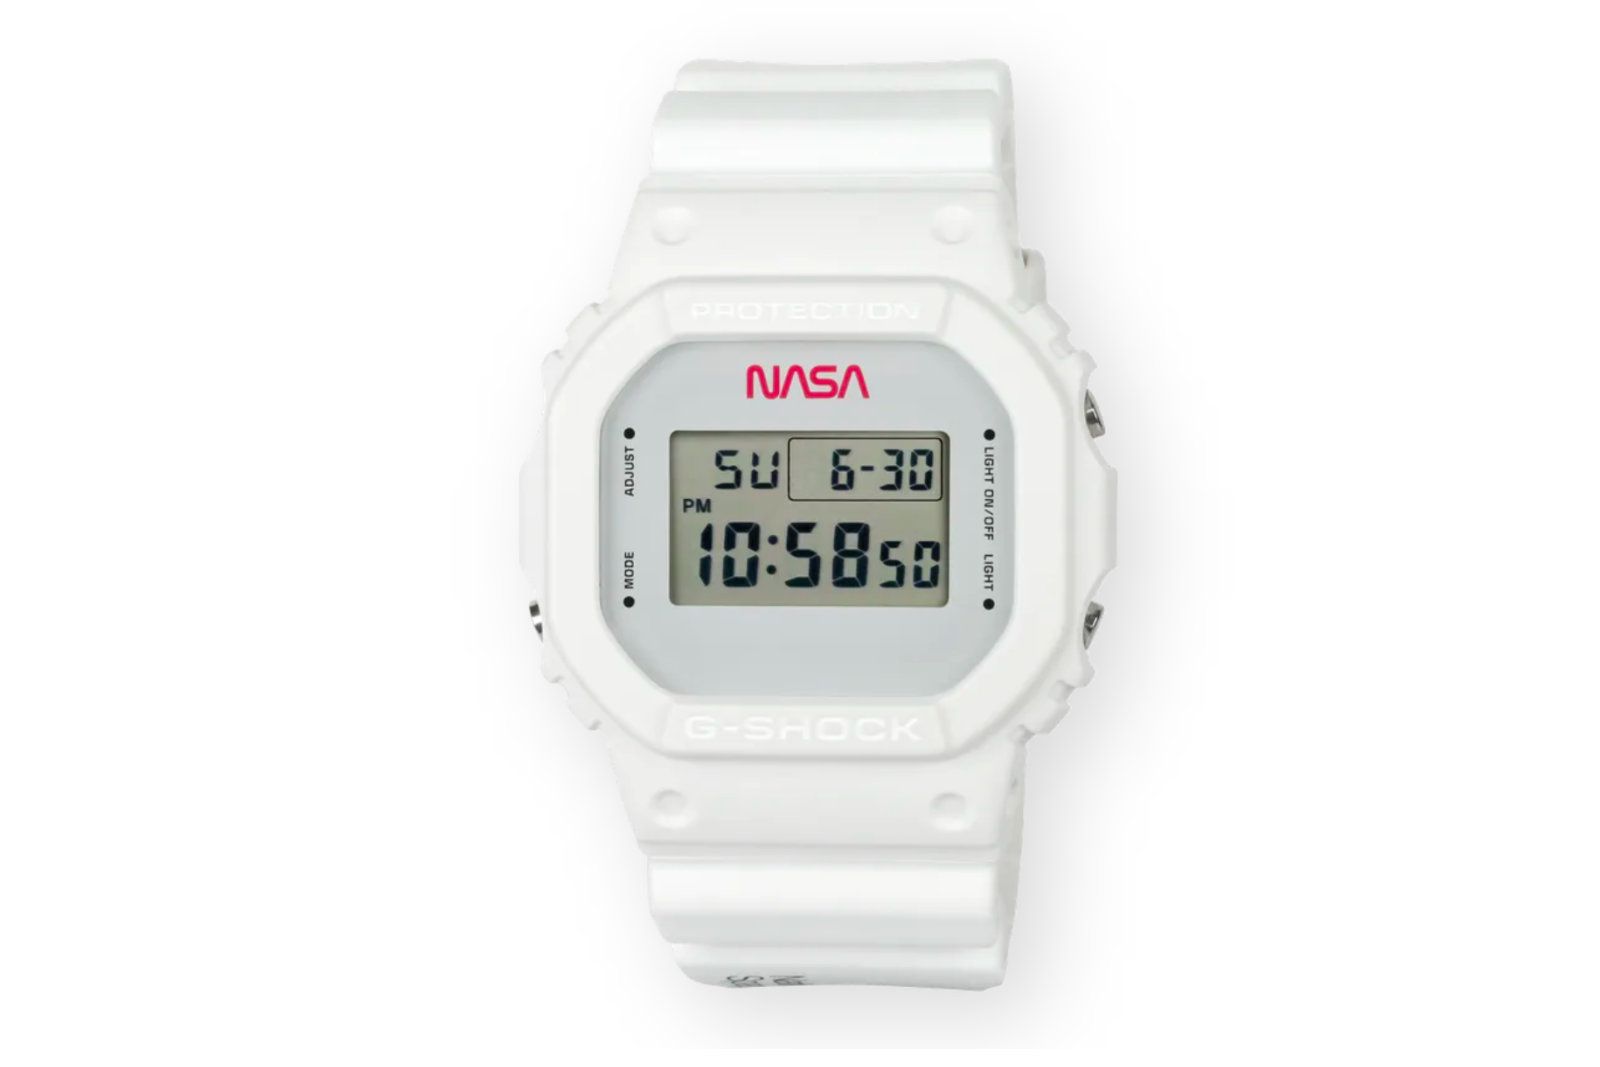 Casios latest limited edition G-Shock watch is NASA themed image 1